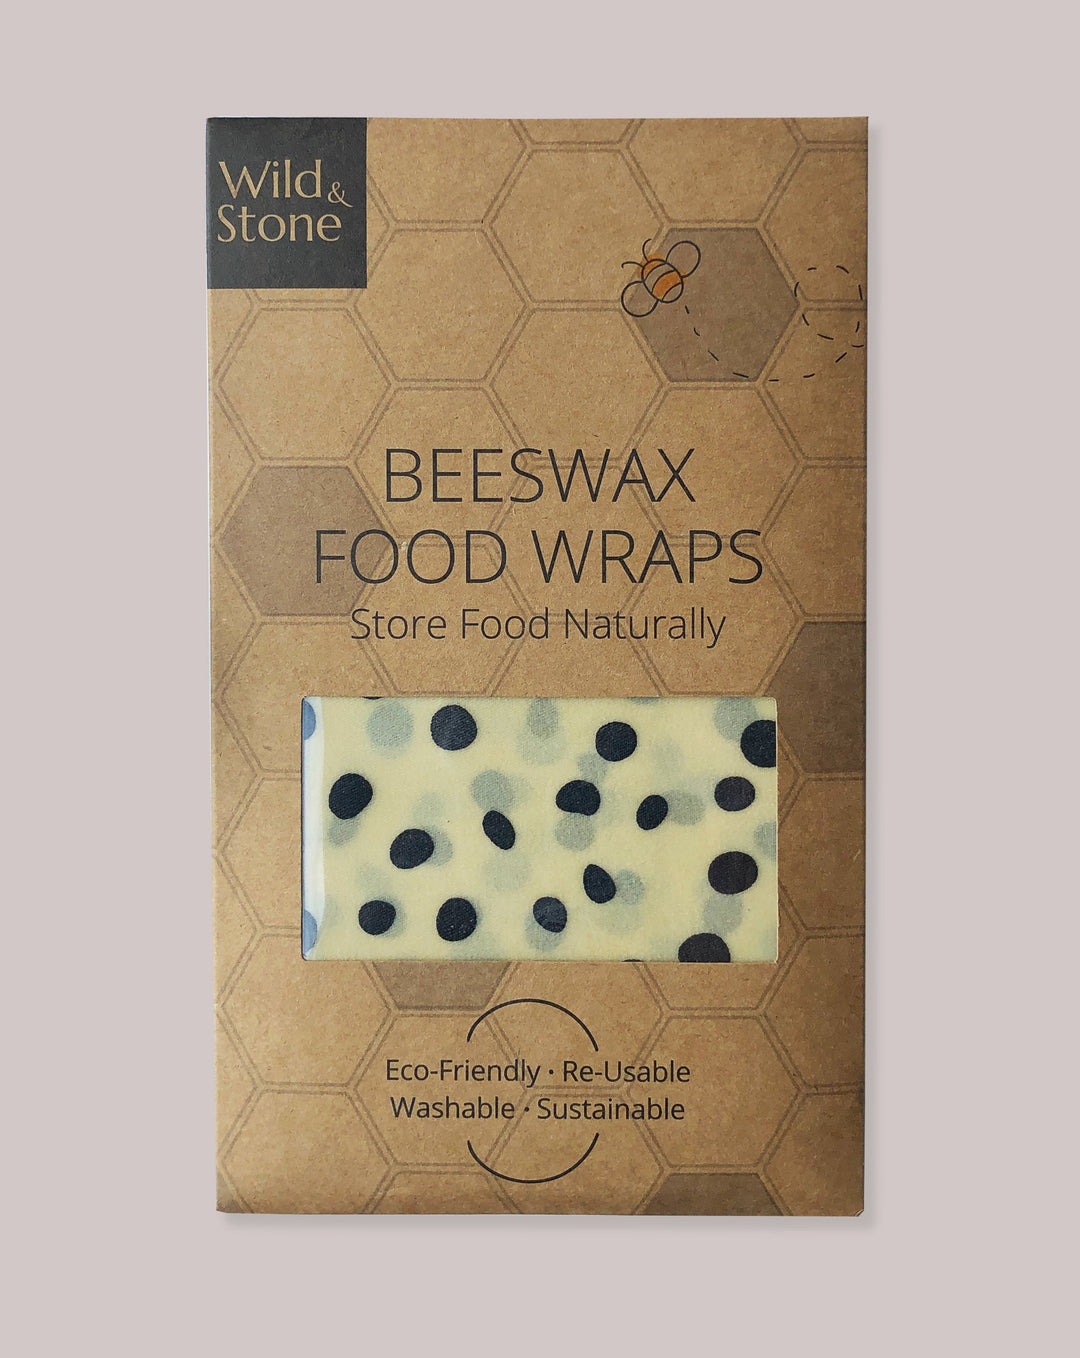 WILD AND STONE FOOD WRAPS Beeswax Food Wrap - 1 Pack. Dalmatian Print.